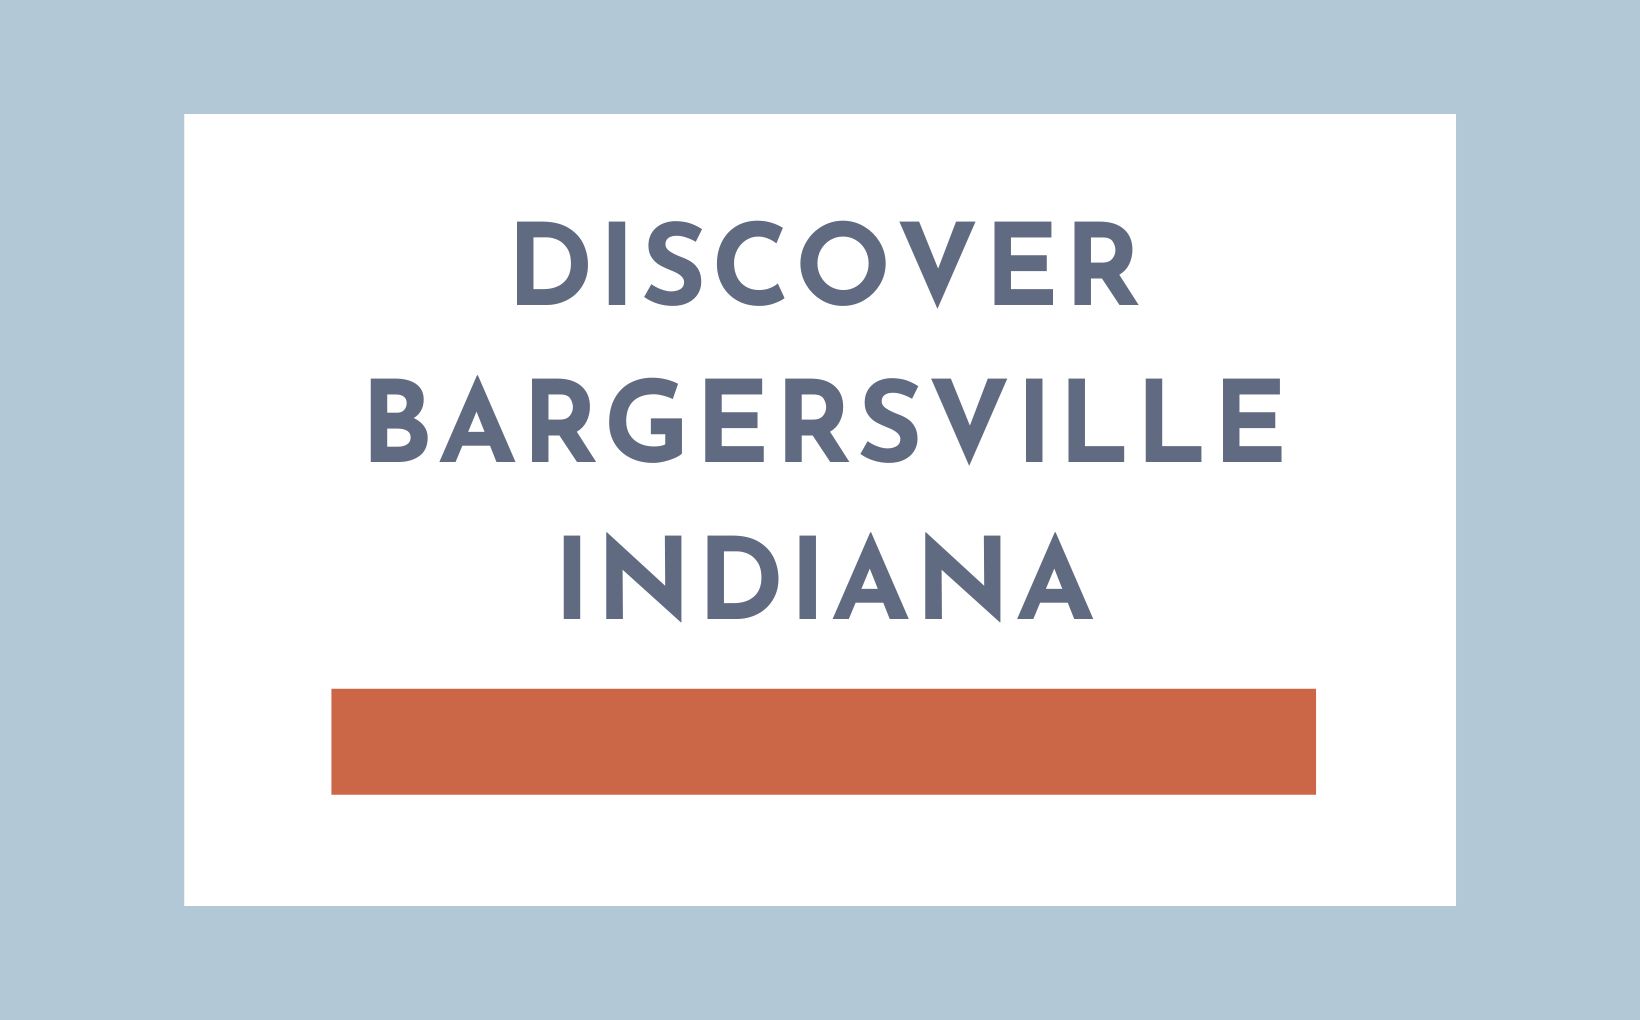 Bargersville Indiana feature image